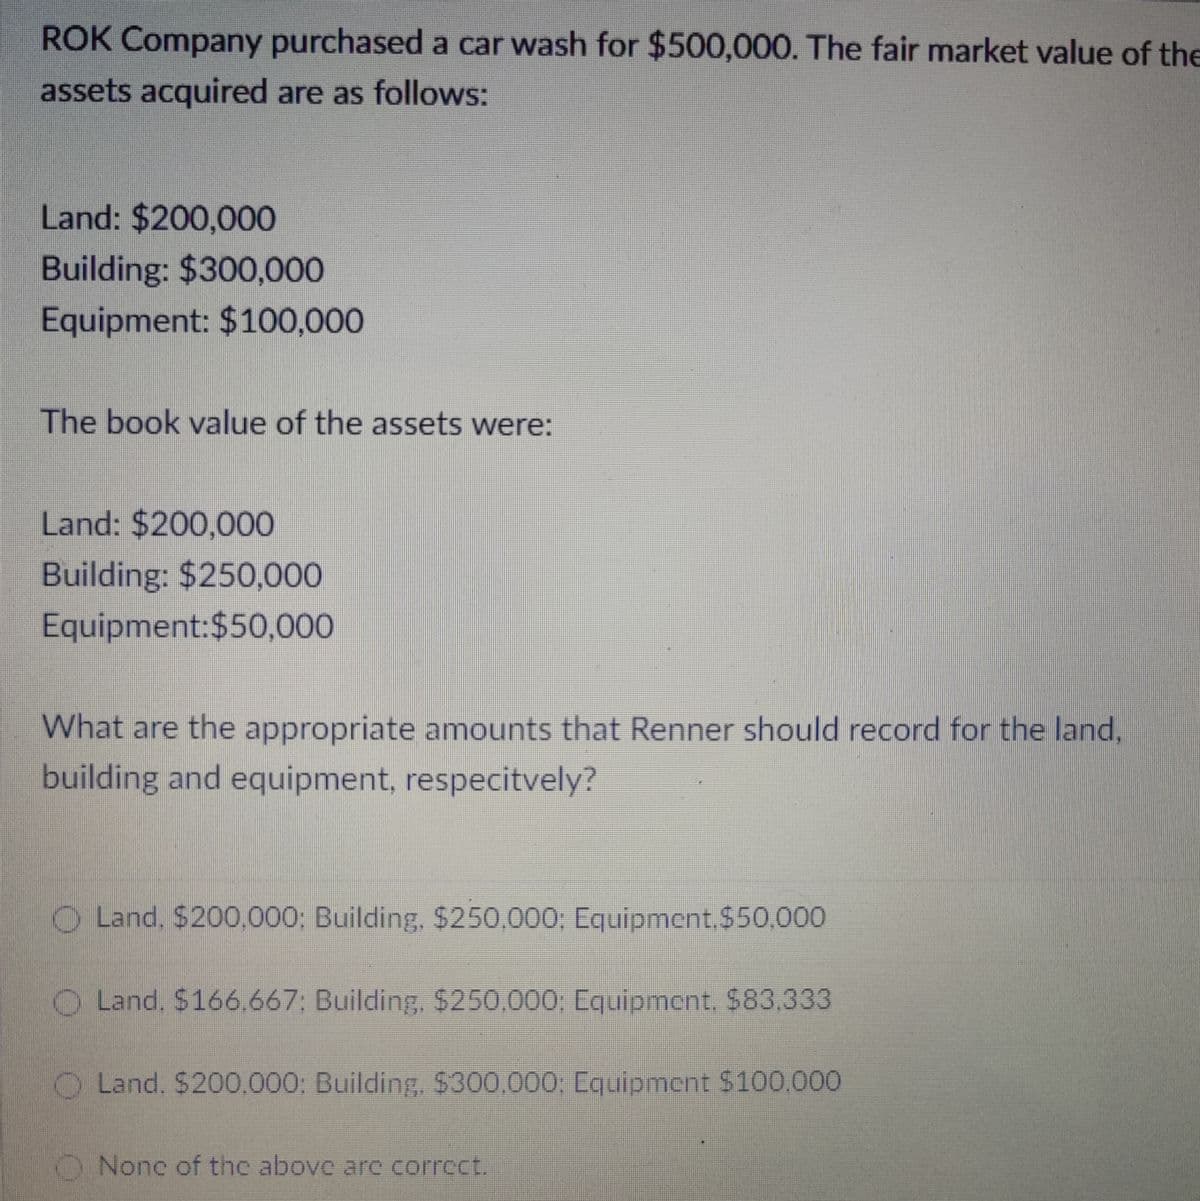 ROK Company purchased a car wash for $500,000. The fair market value of the
assets acquired are as follows:
Land: $200,000
Building: $300,000
Equipment: $100,000
The book value of the assets were:
Land: $200,000
Building: $250,000
Equipment:$50,000
What are the appropriate amounts that Renner should record for the land,
building and equipment, respecitvely?
Land, $200,000: Building, $250,000; Equipment, $50,000
O Land. $166.667; Building, $250,000; Equipment. $83,333
O Land. $200,000: Building, $300,000; Equipment $100.000
None of the above are correct.